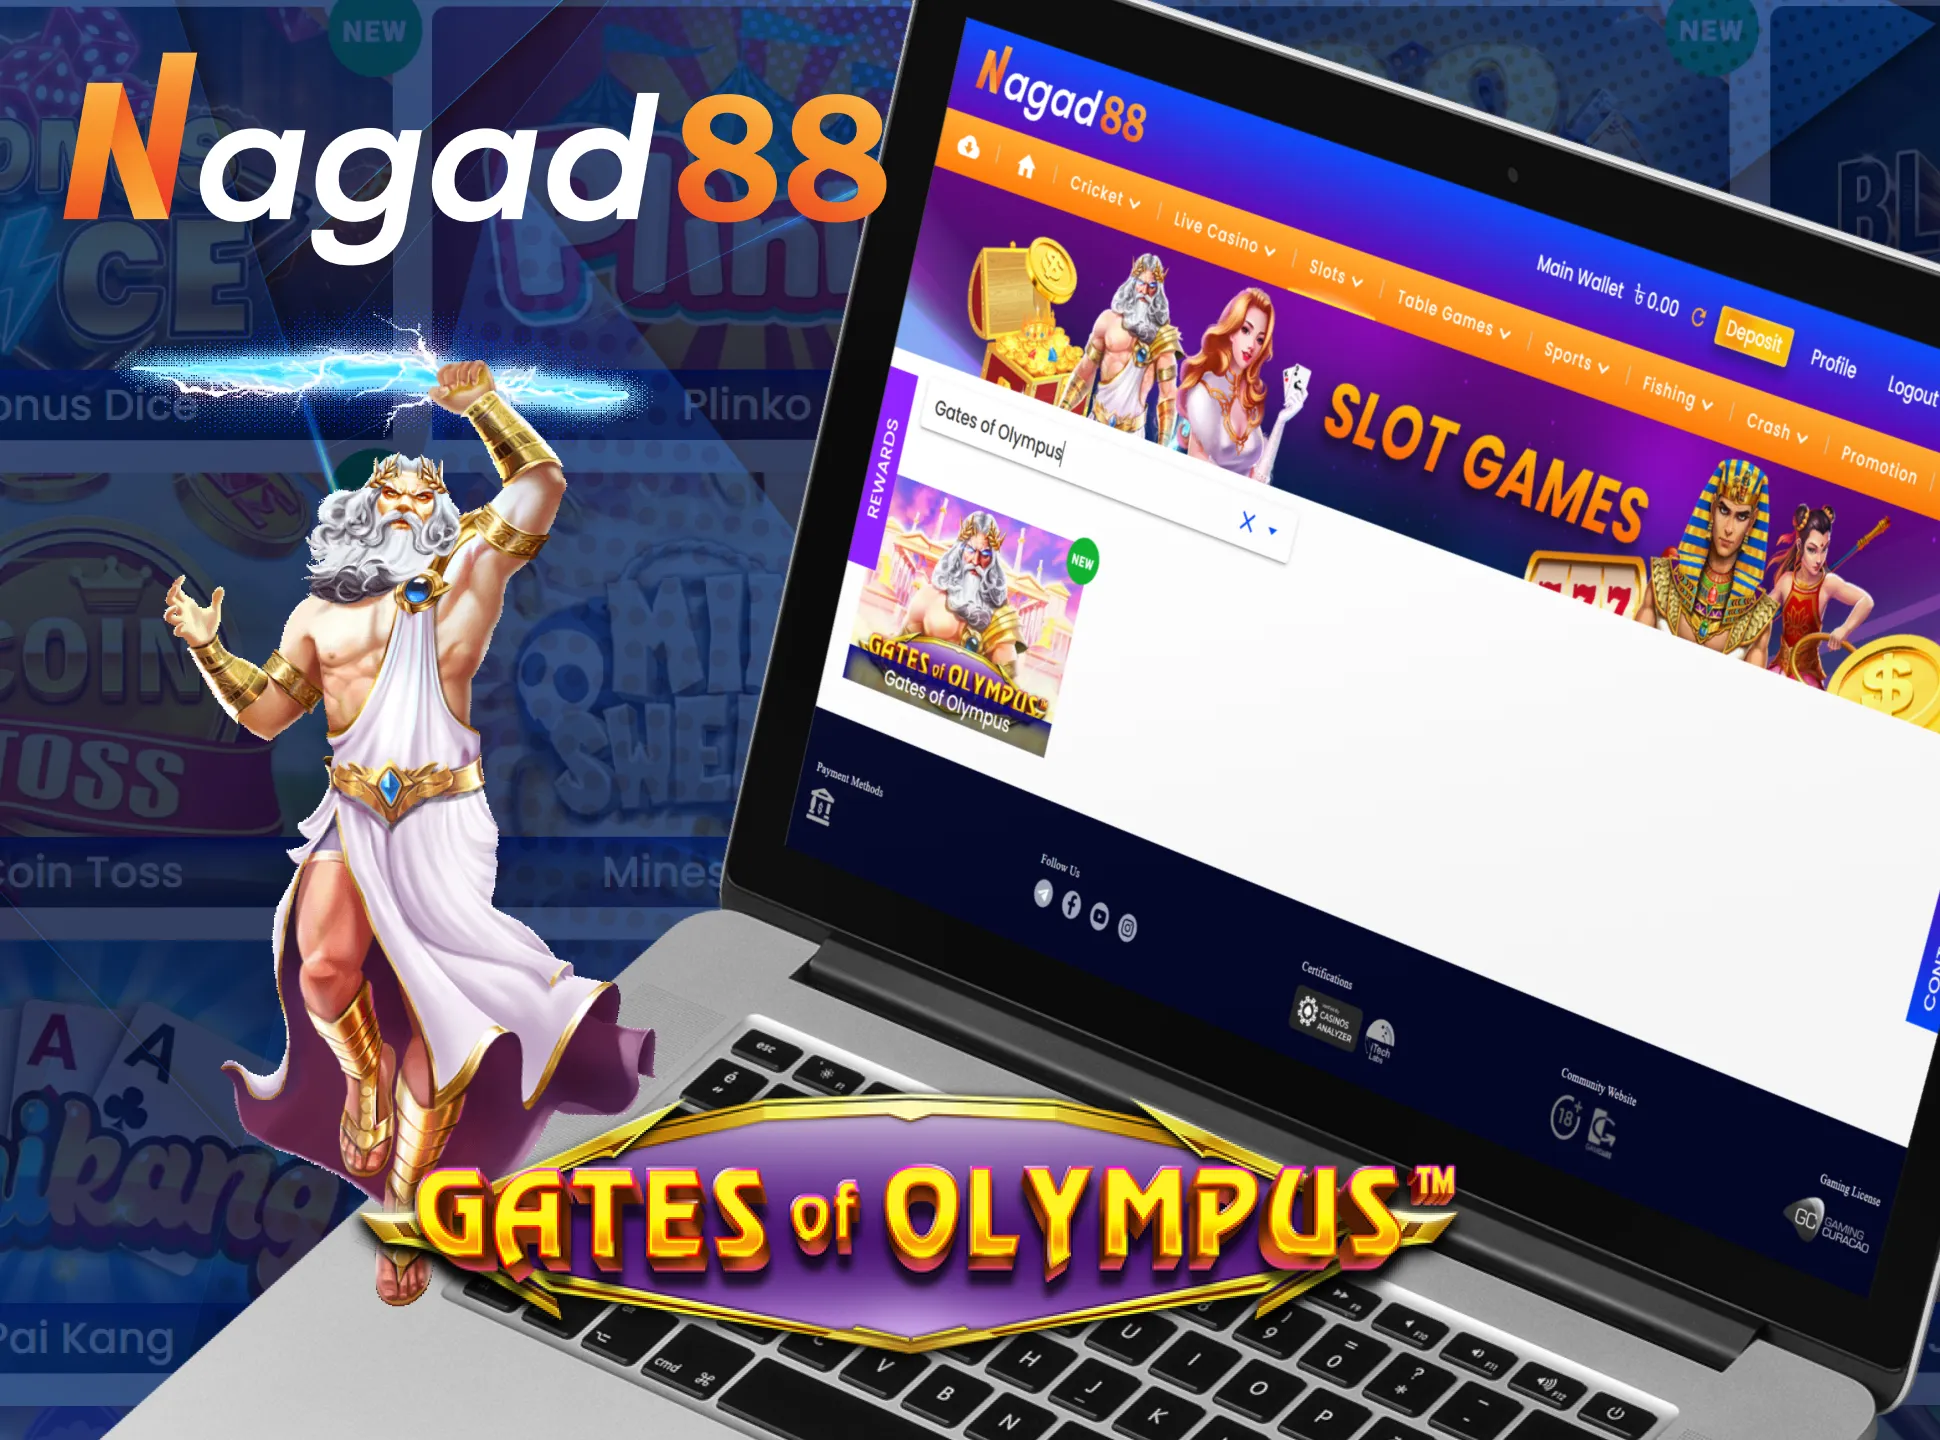 Play Gates of Olympus at Nagad88 with pleasure.